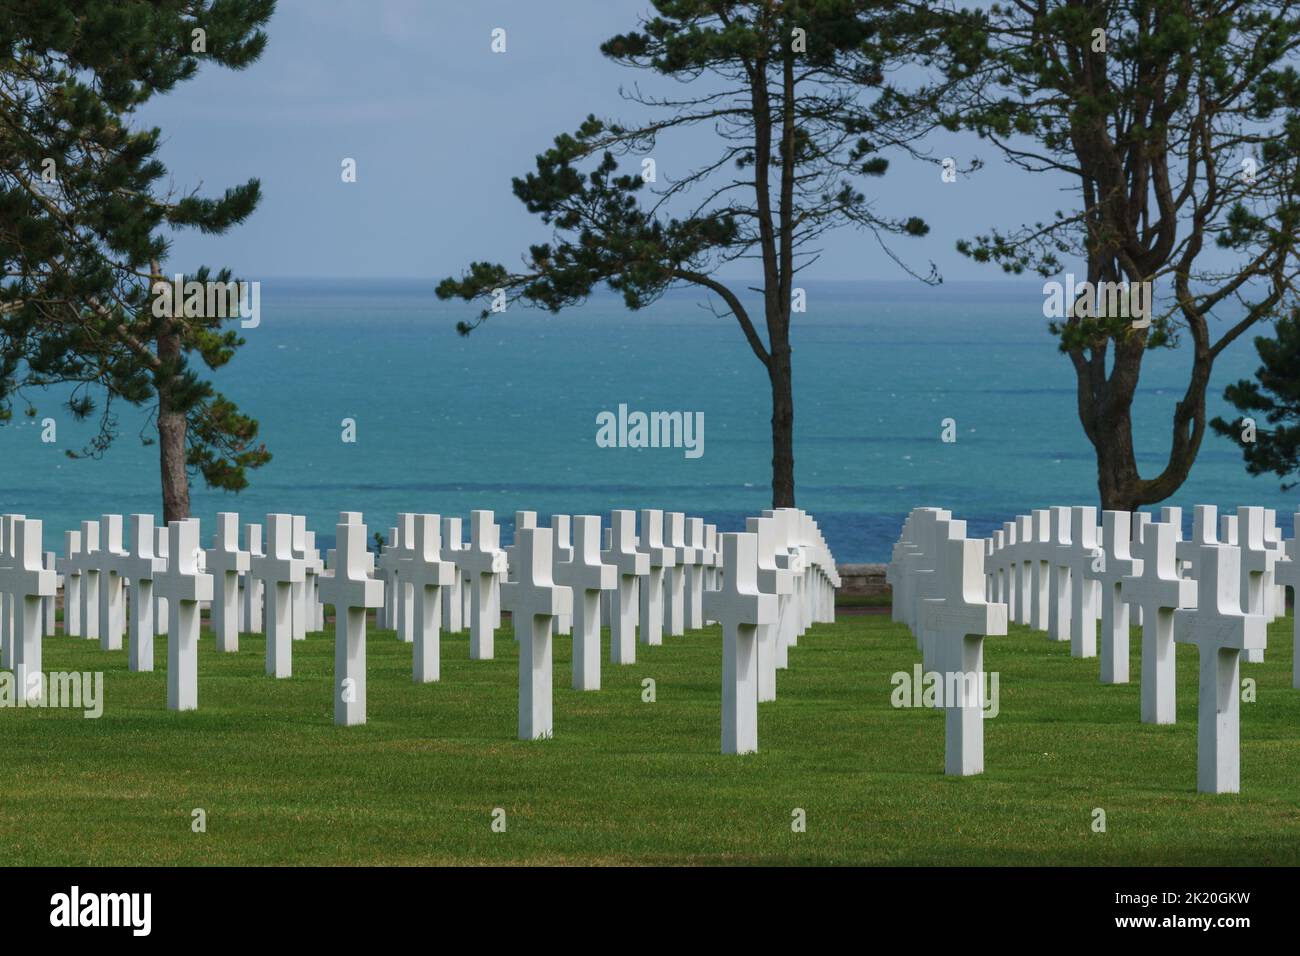 Rows of white crosses of fallen american soldiers at American War Cemetery at Omaha Beach Cimetiere Americain, Colleville-sur-Mer, Normandy, France Stock Photo